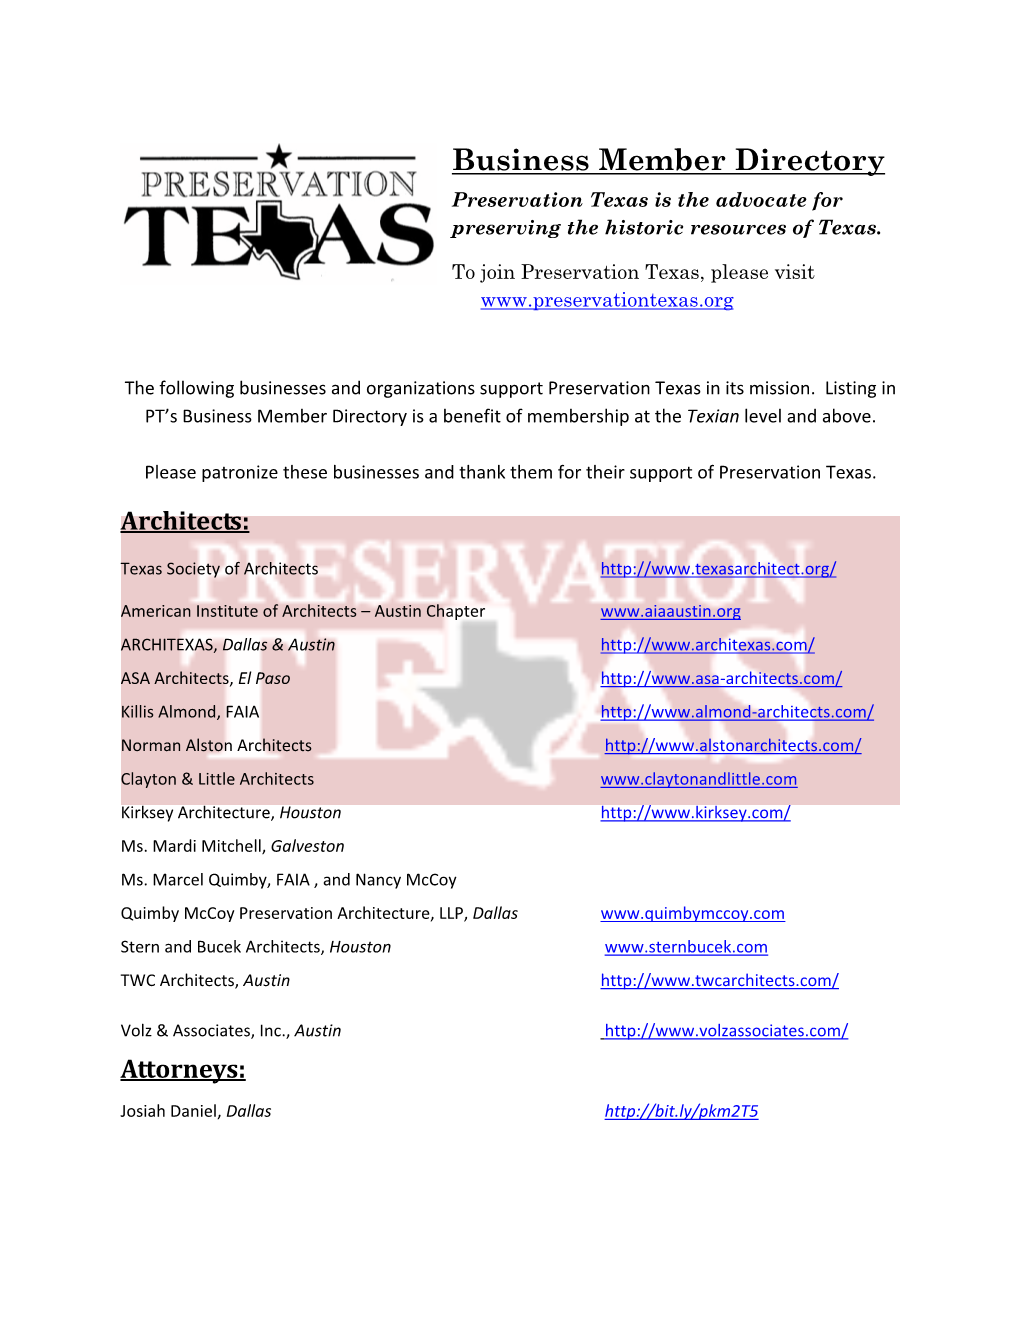 Business Member Directory Preservation Texas Is the Advocate for Preserving the Historic Resources of Texas